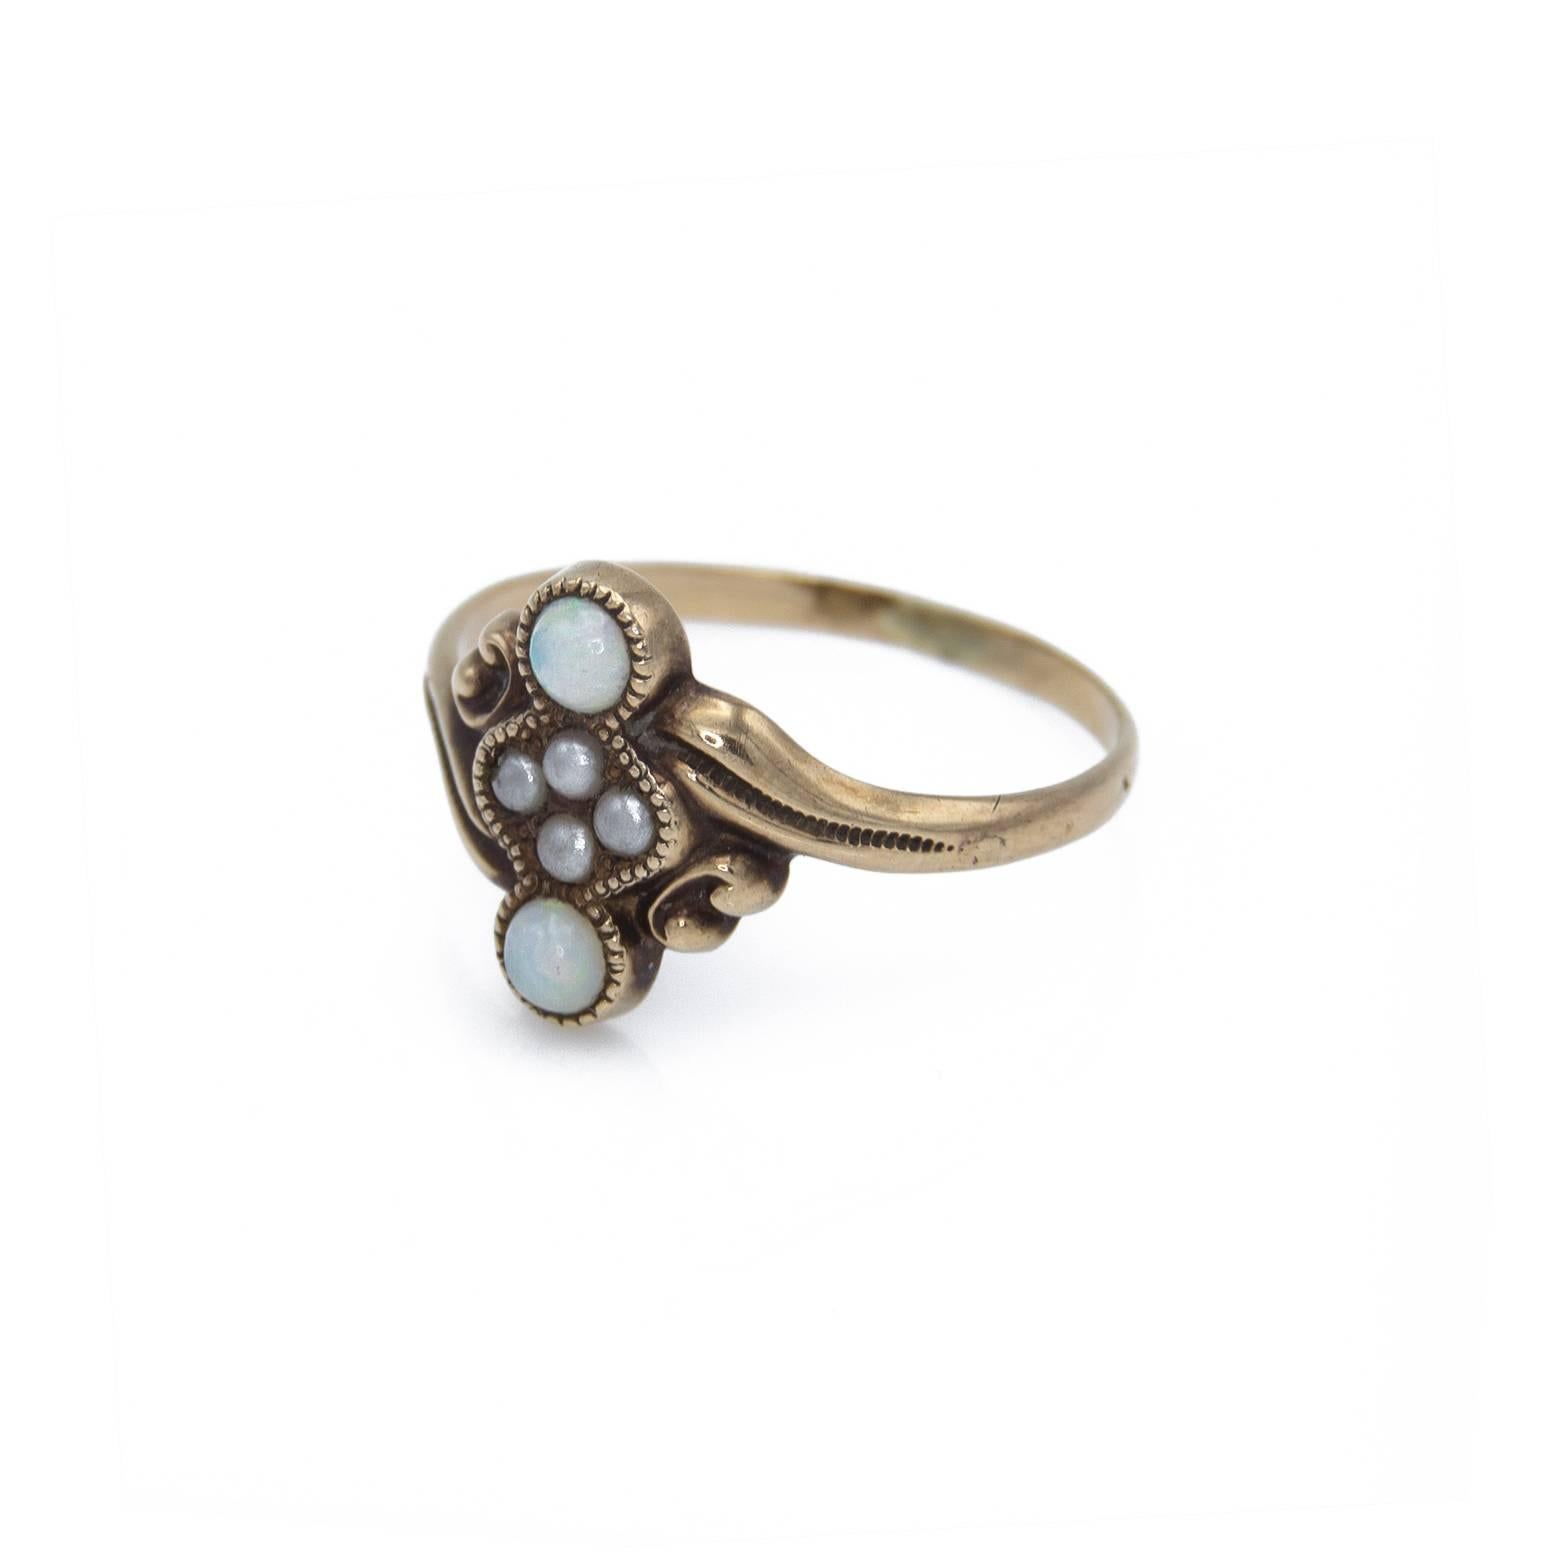 This delicately set opal and freshwater pearl ring has a beautiful swirl antiqued in 10k. The overall effect is sweet and beautiful ....The perfect gift for a young woman.